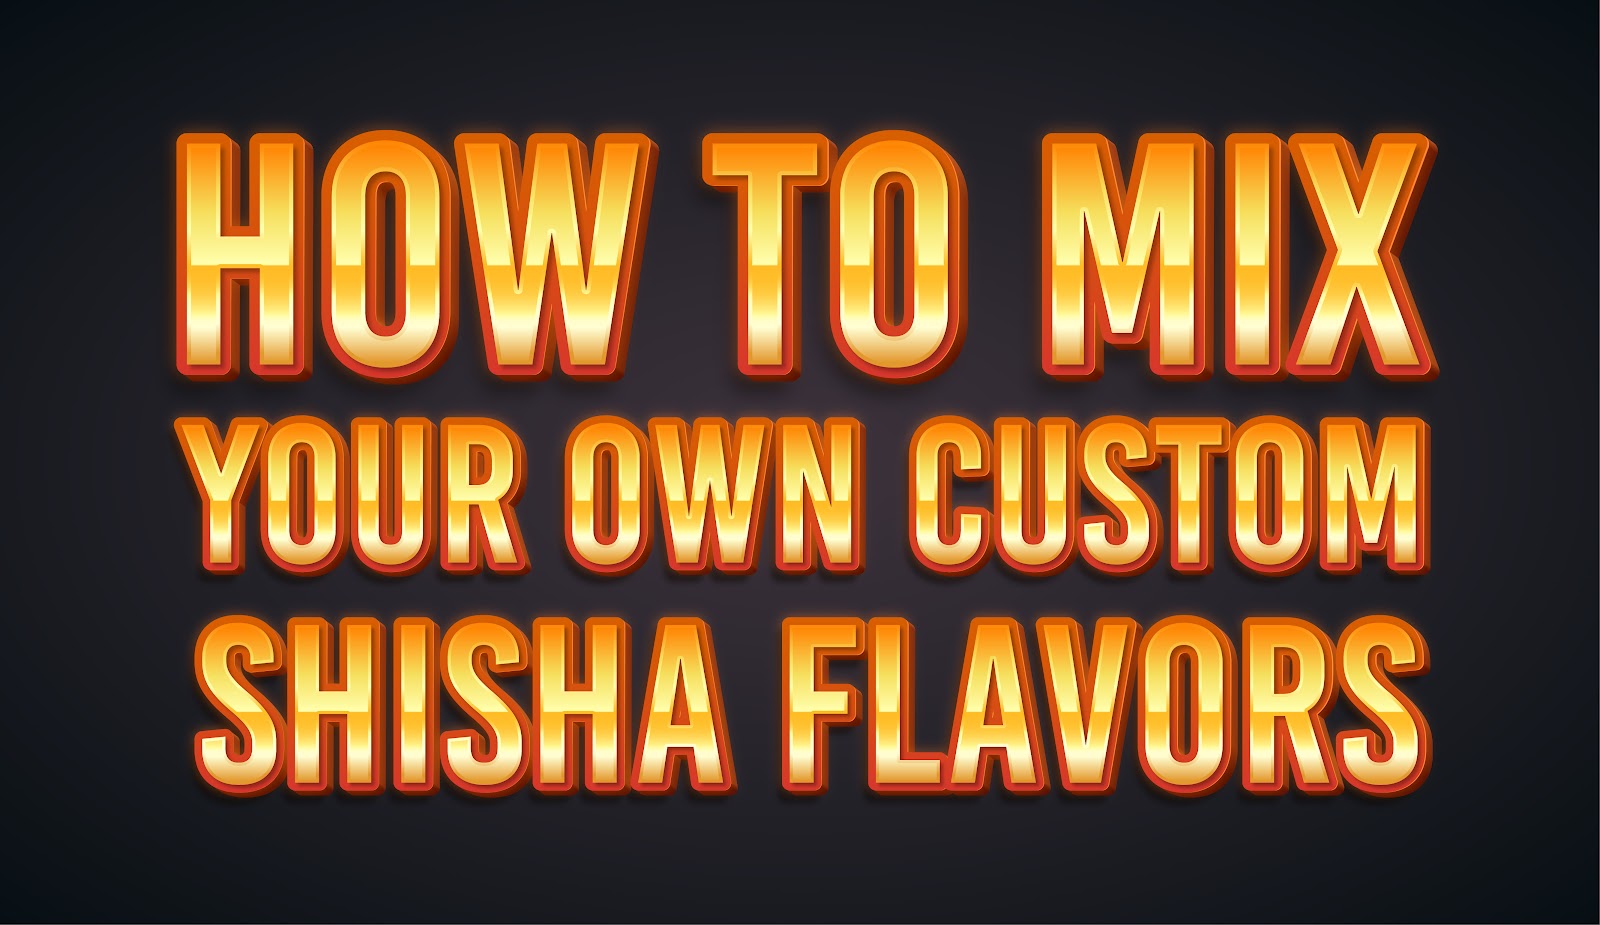 How to Mix Your Own Custom Shisha Flavors